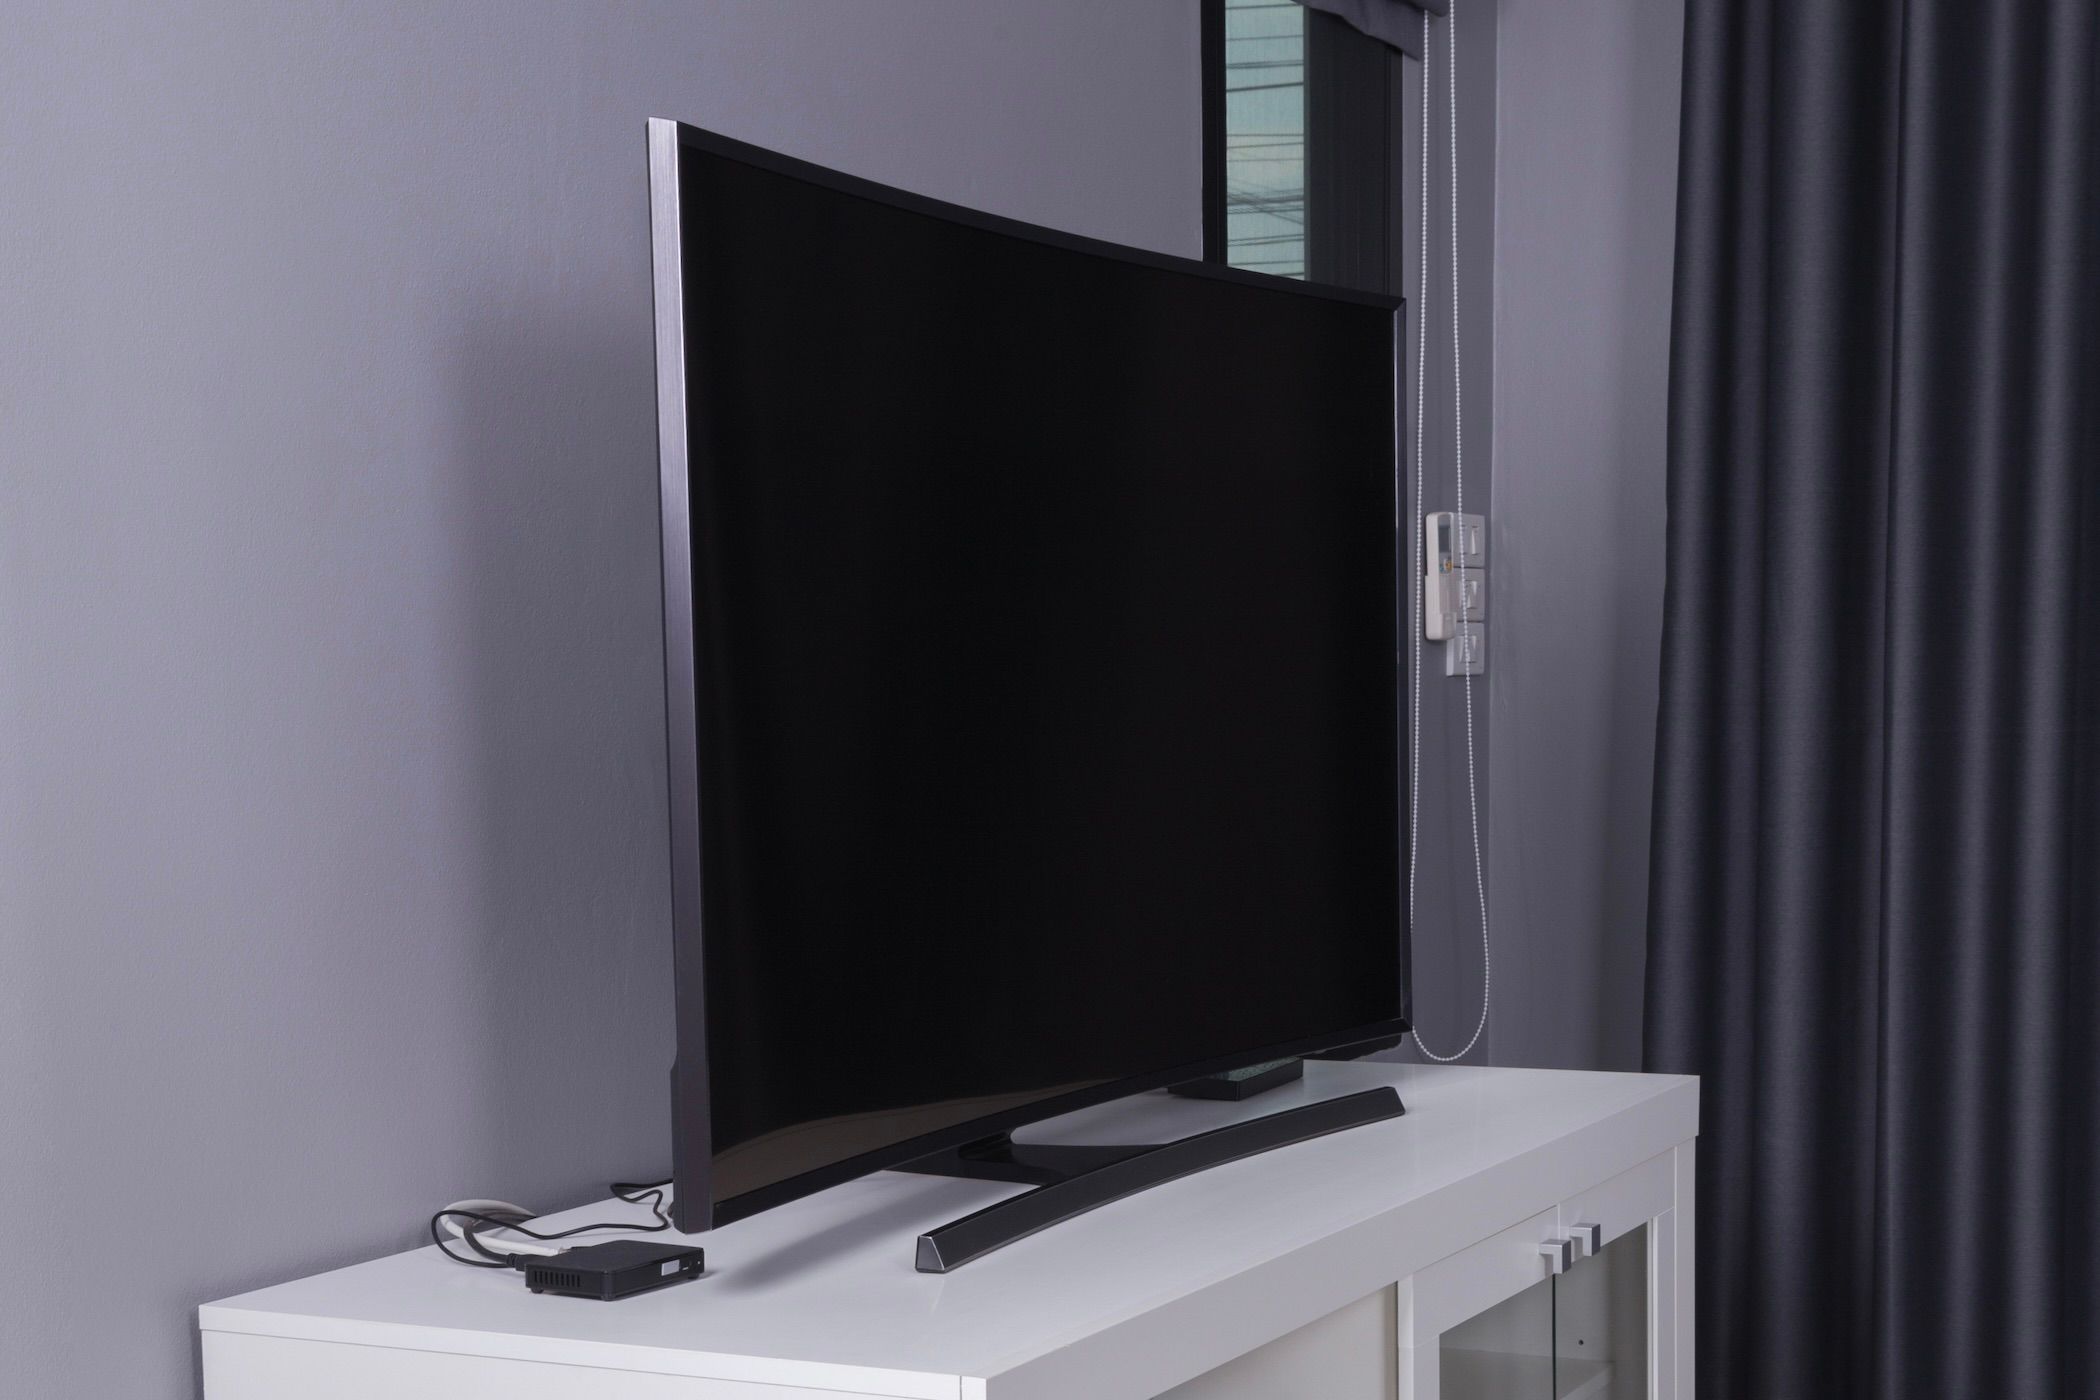 Curved LED TV on a white stand.